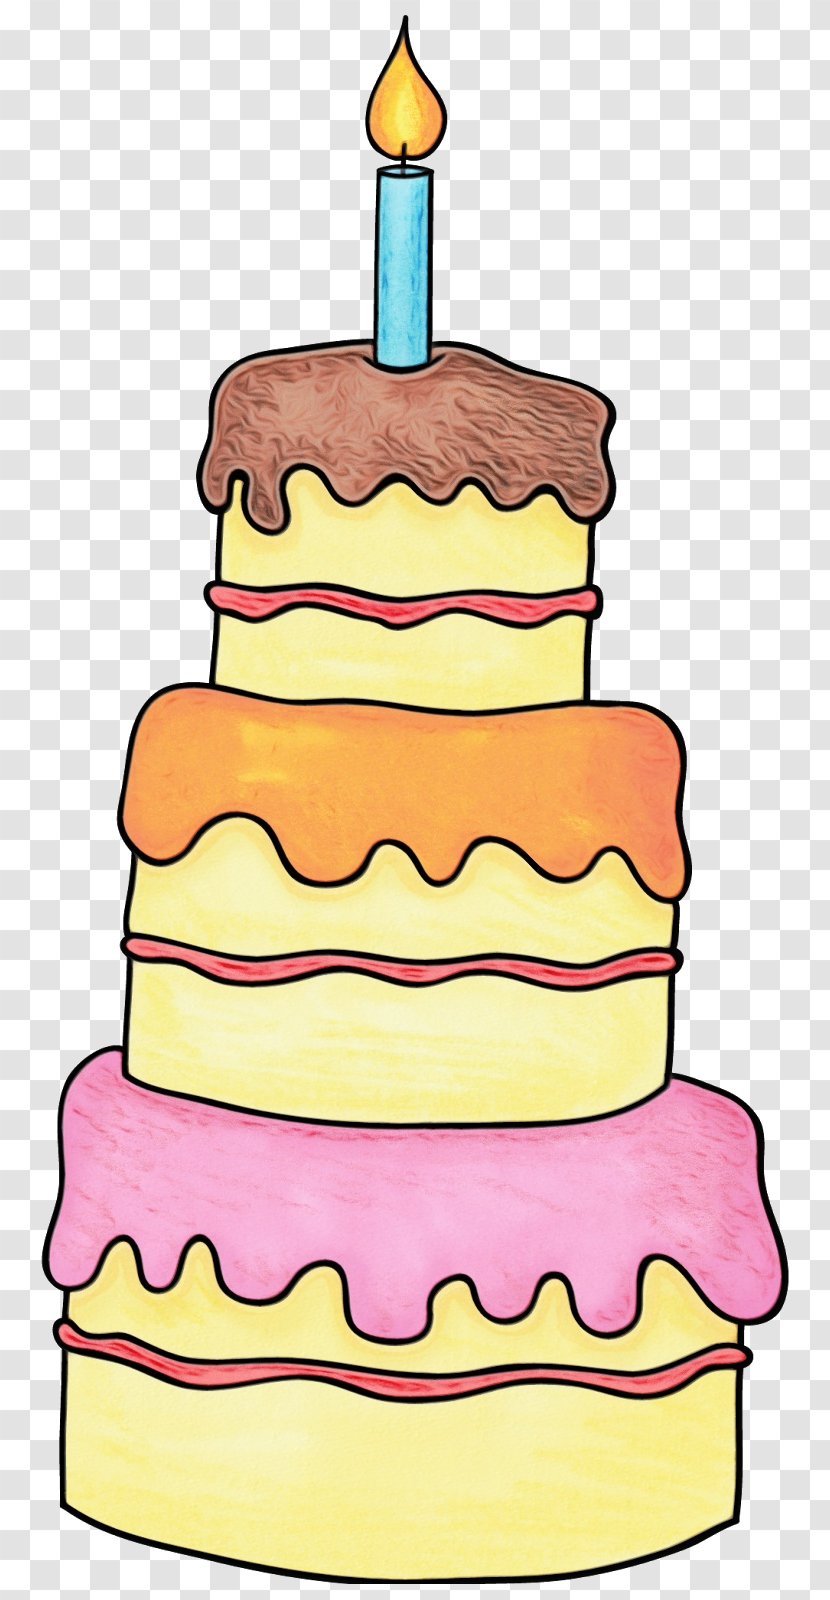 Birthday Candle - Icing - Dessert Baked Goods Transparent PNG